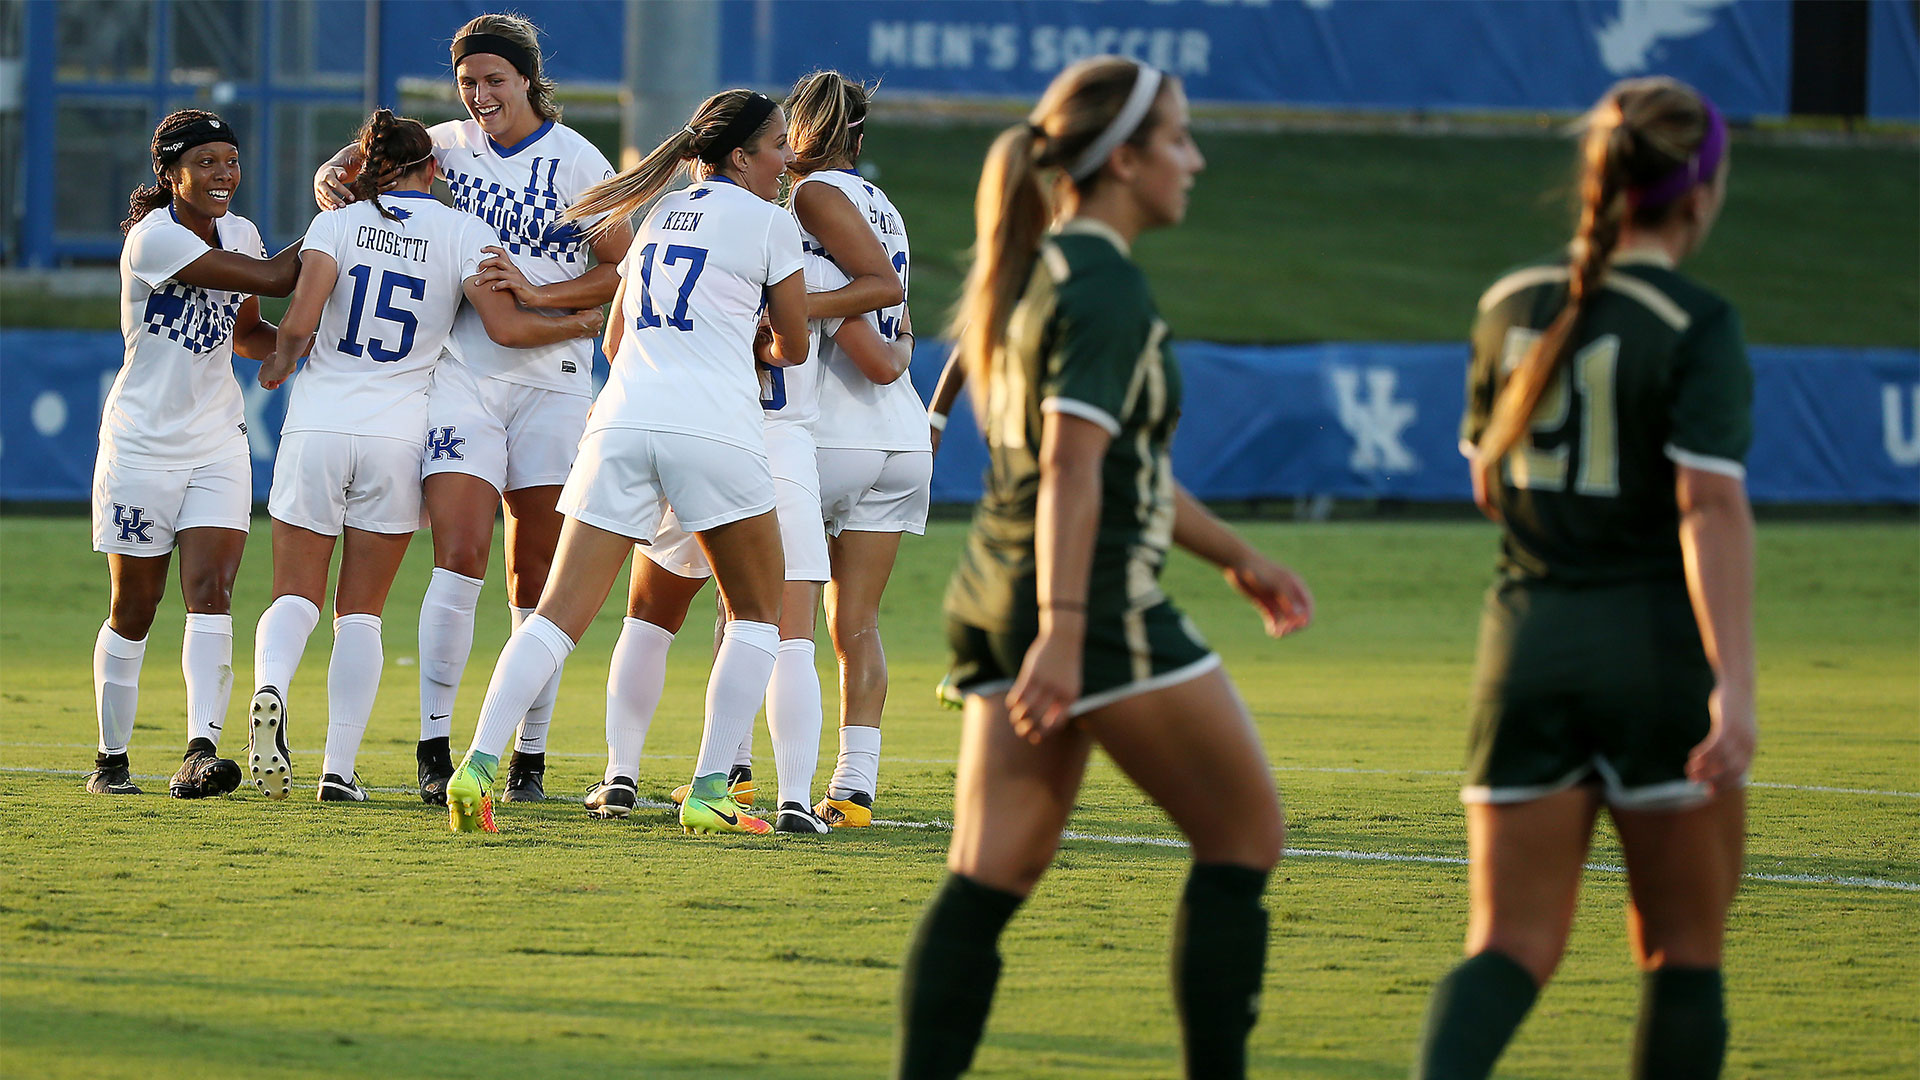 UK Women’s Soccer Selected for Two National ESPN Telecasts